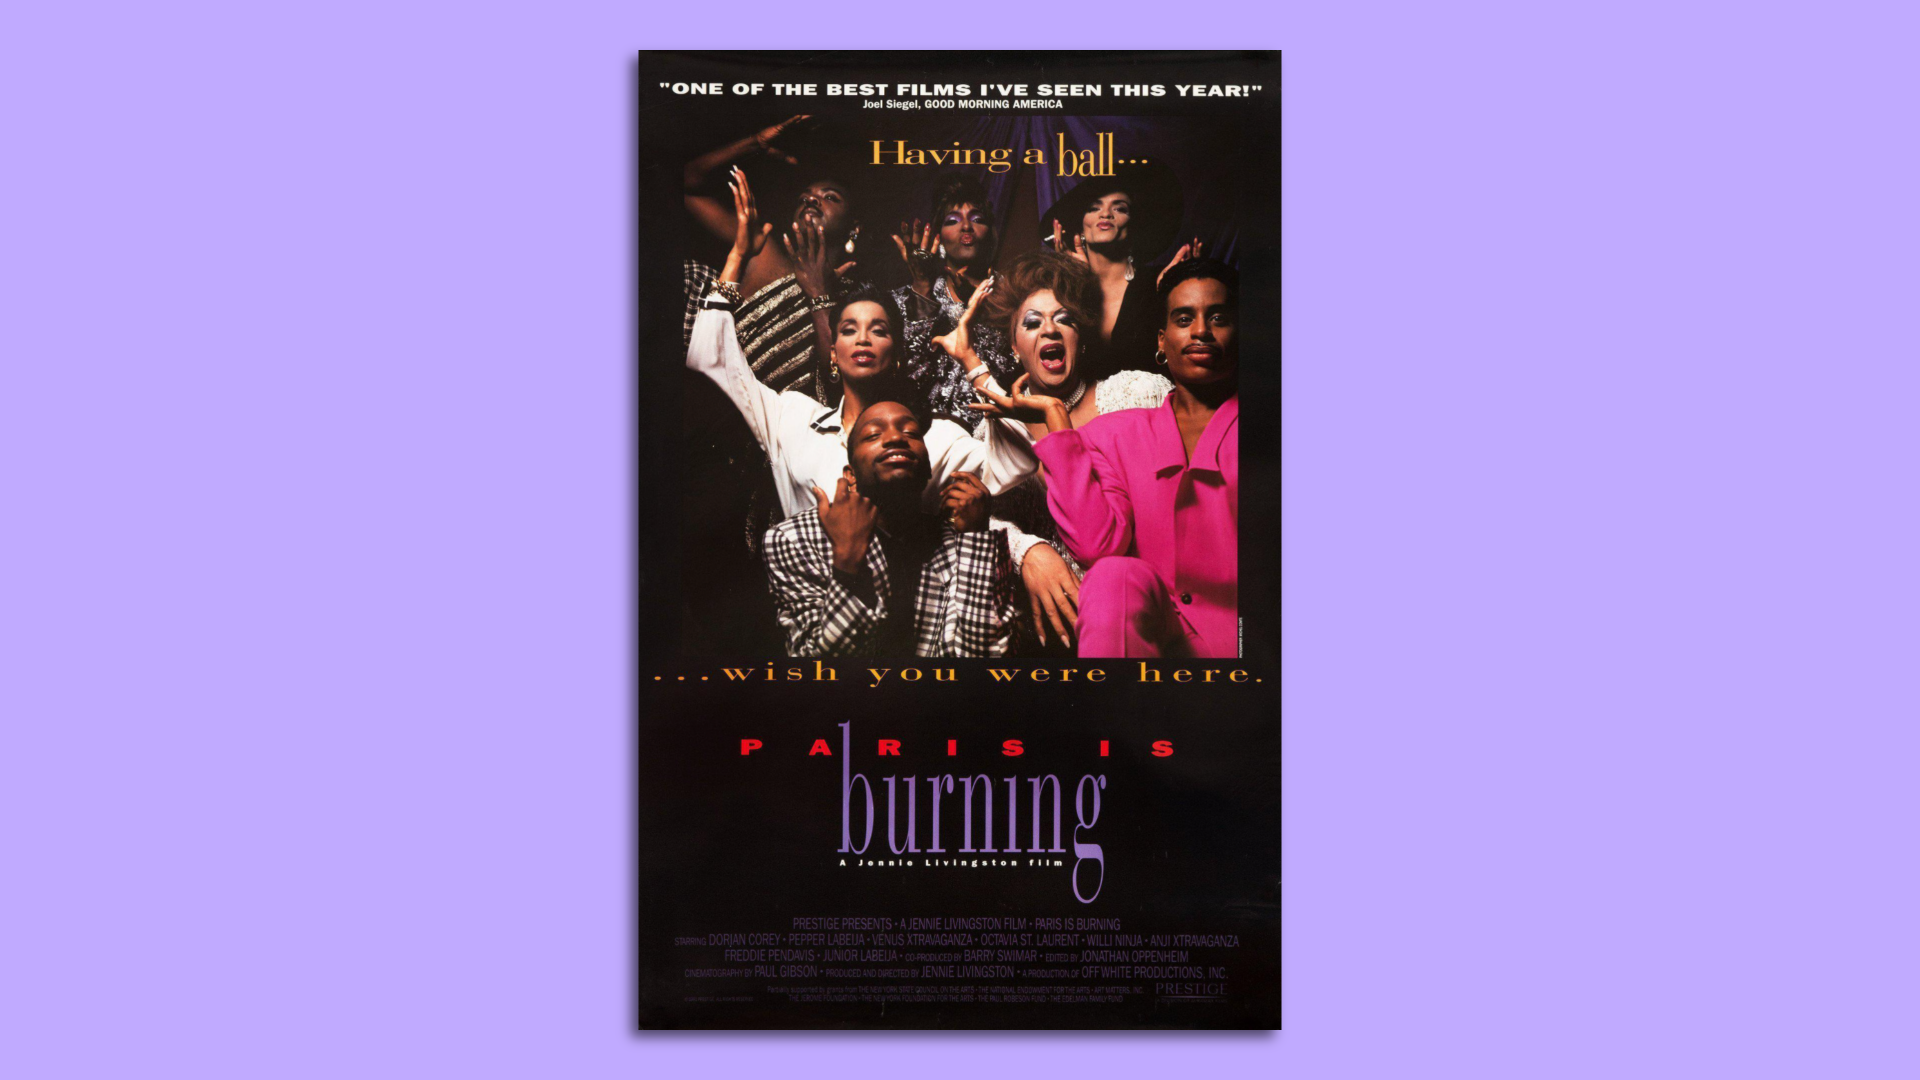 A poster from Paris is Burning